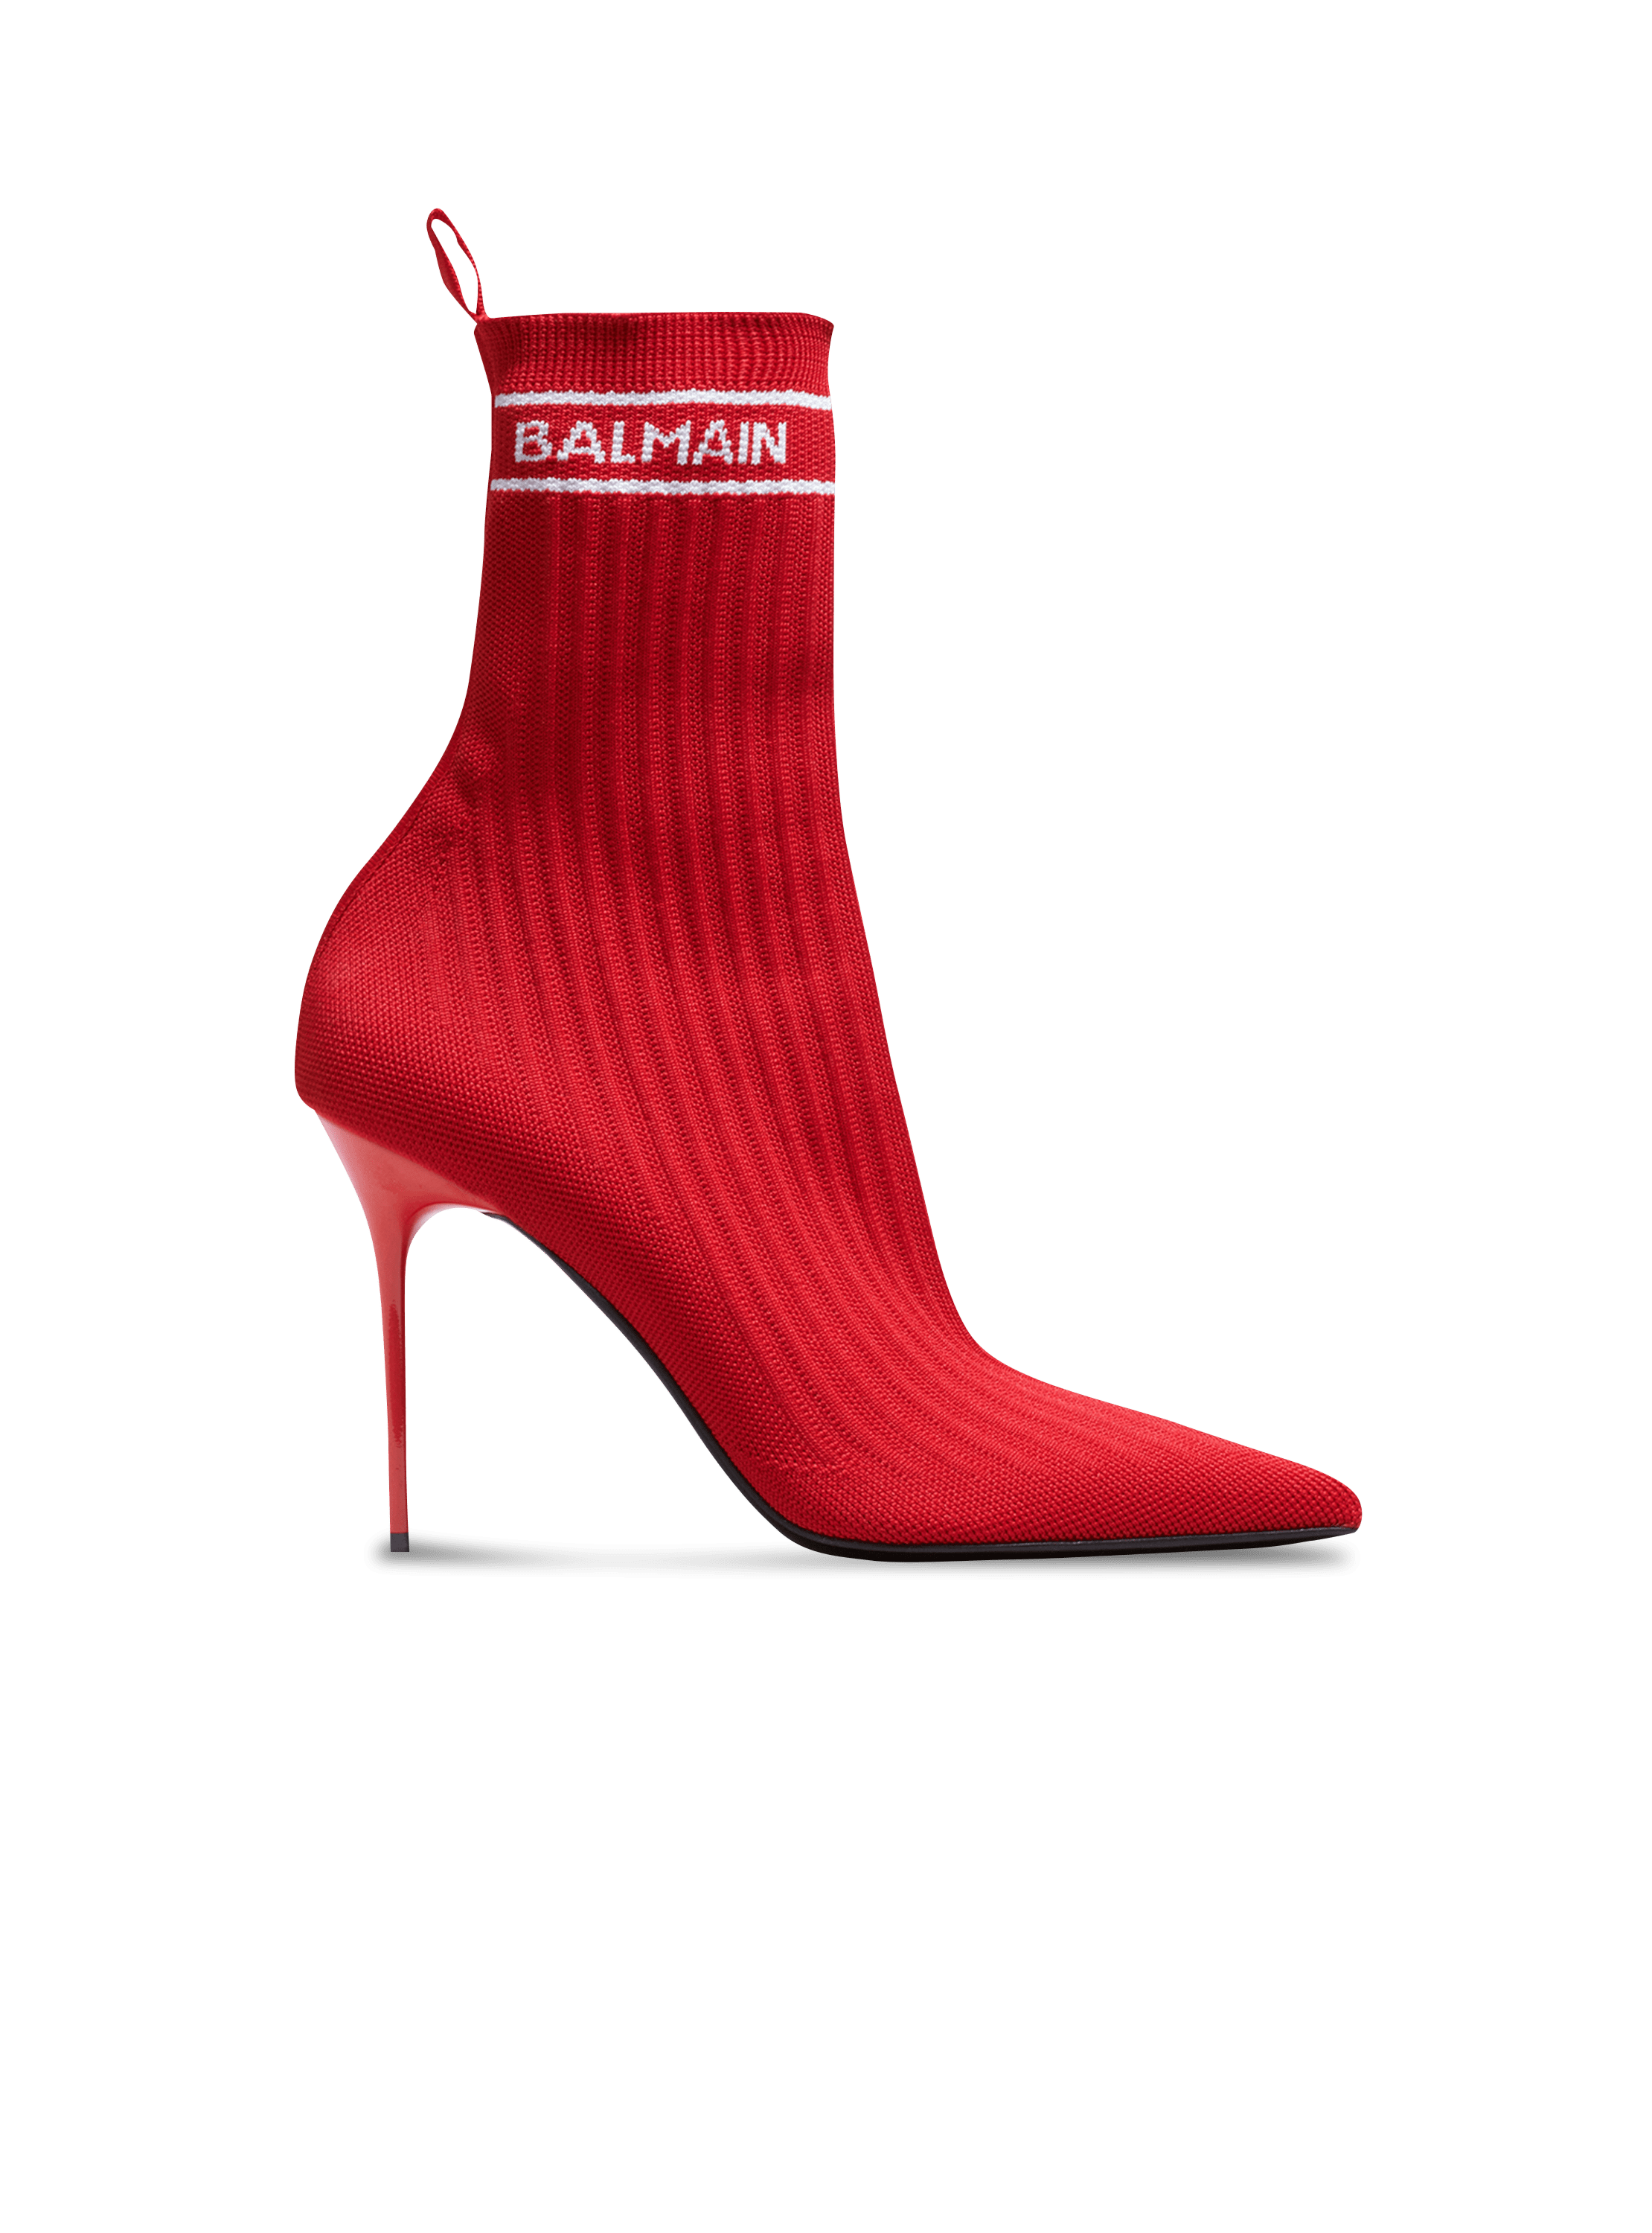 Skye stretch knit ankle boots, red, hi-res